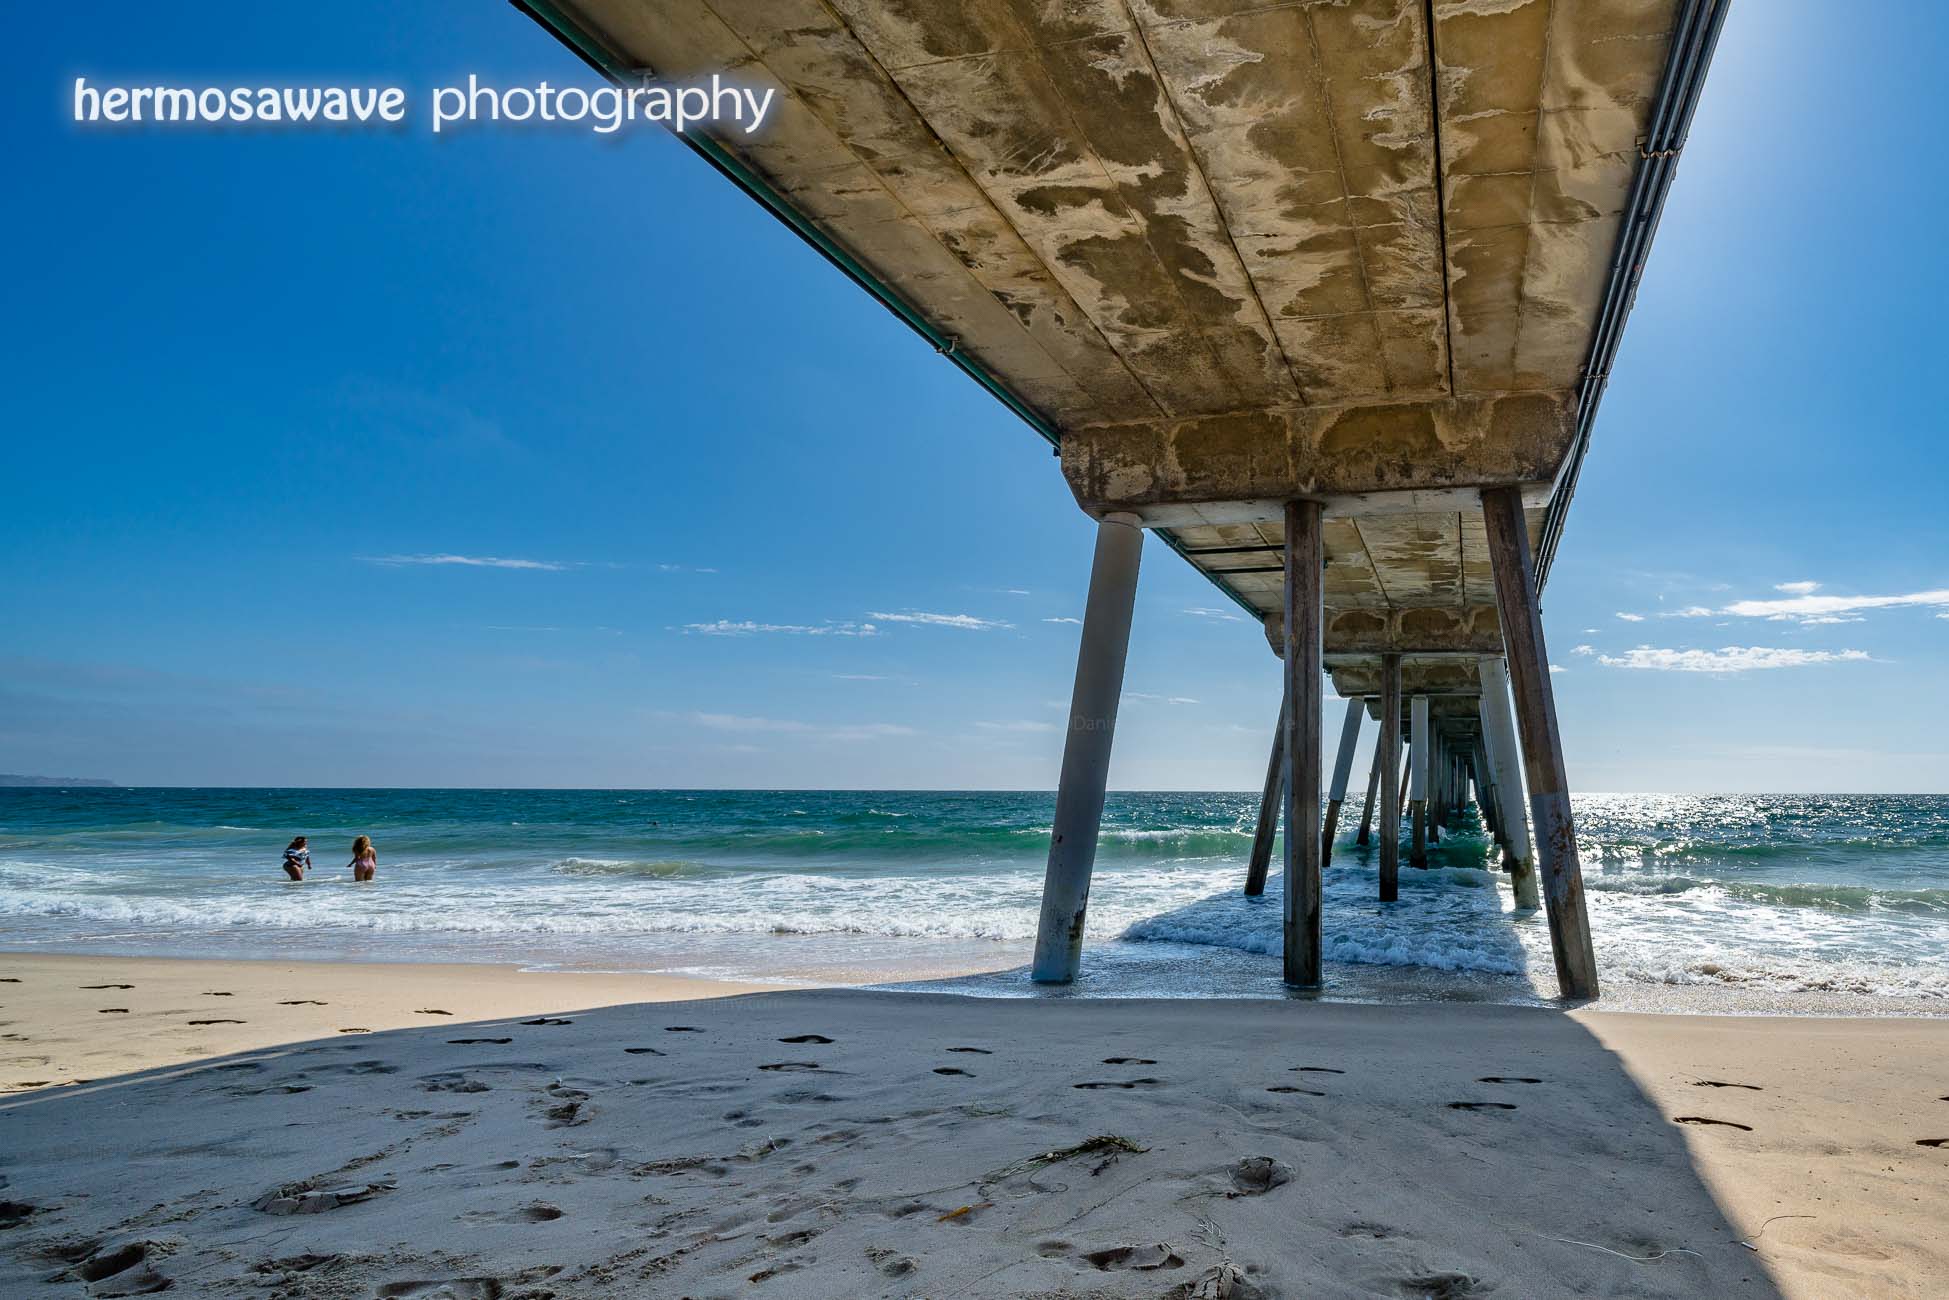 Afternoon Under the Pier